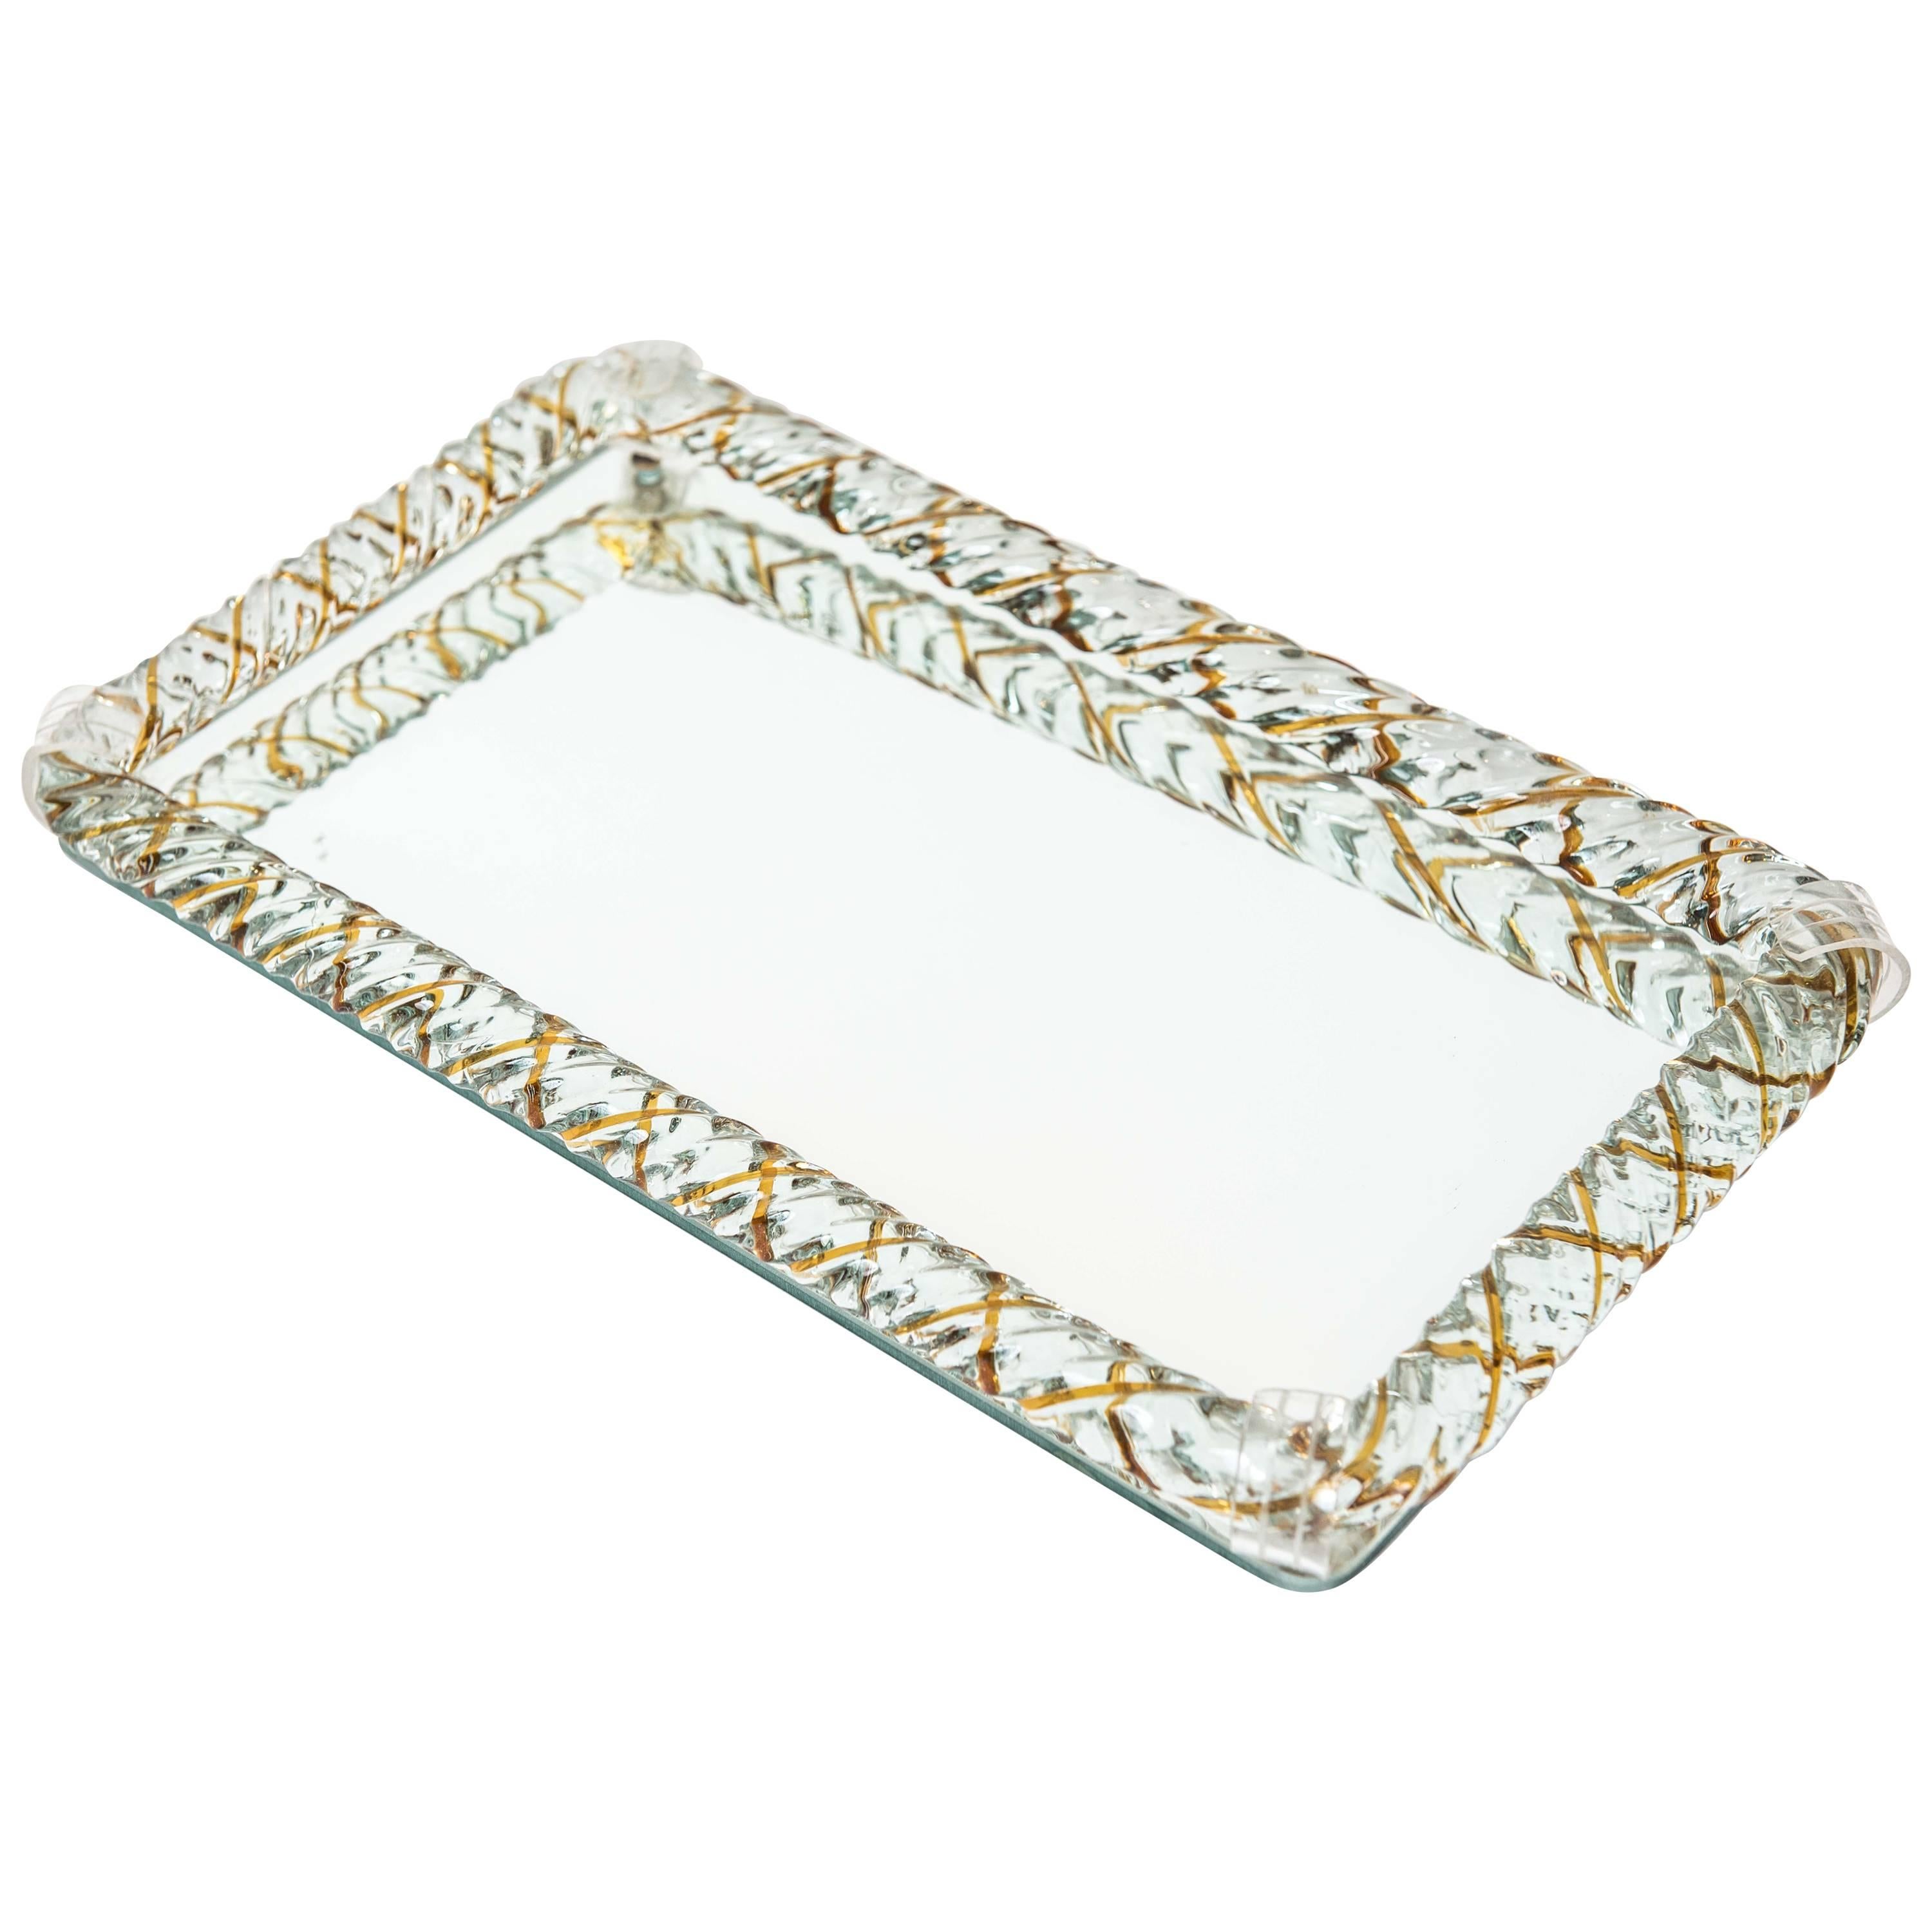 Vintage Murano Glass Rope Tray